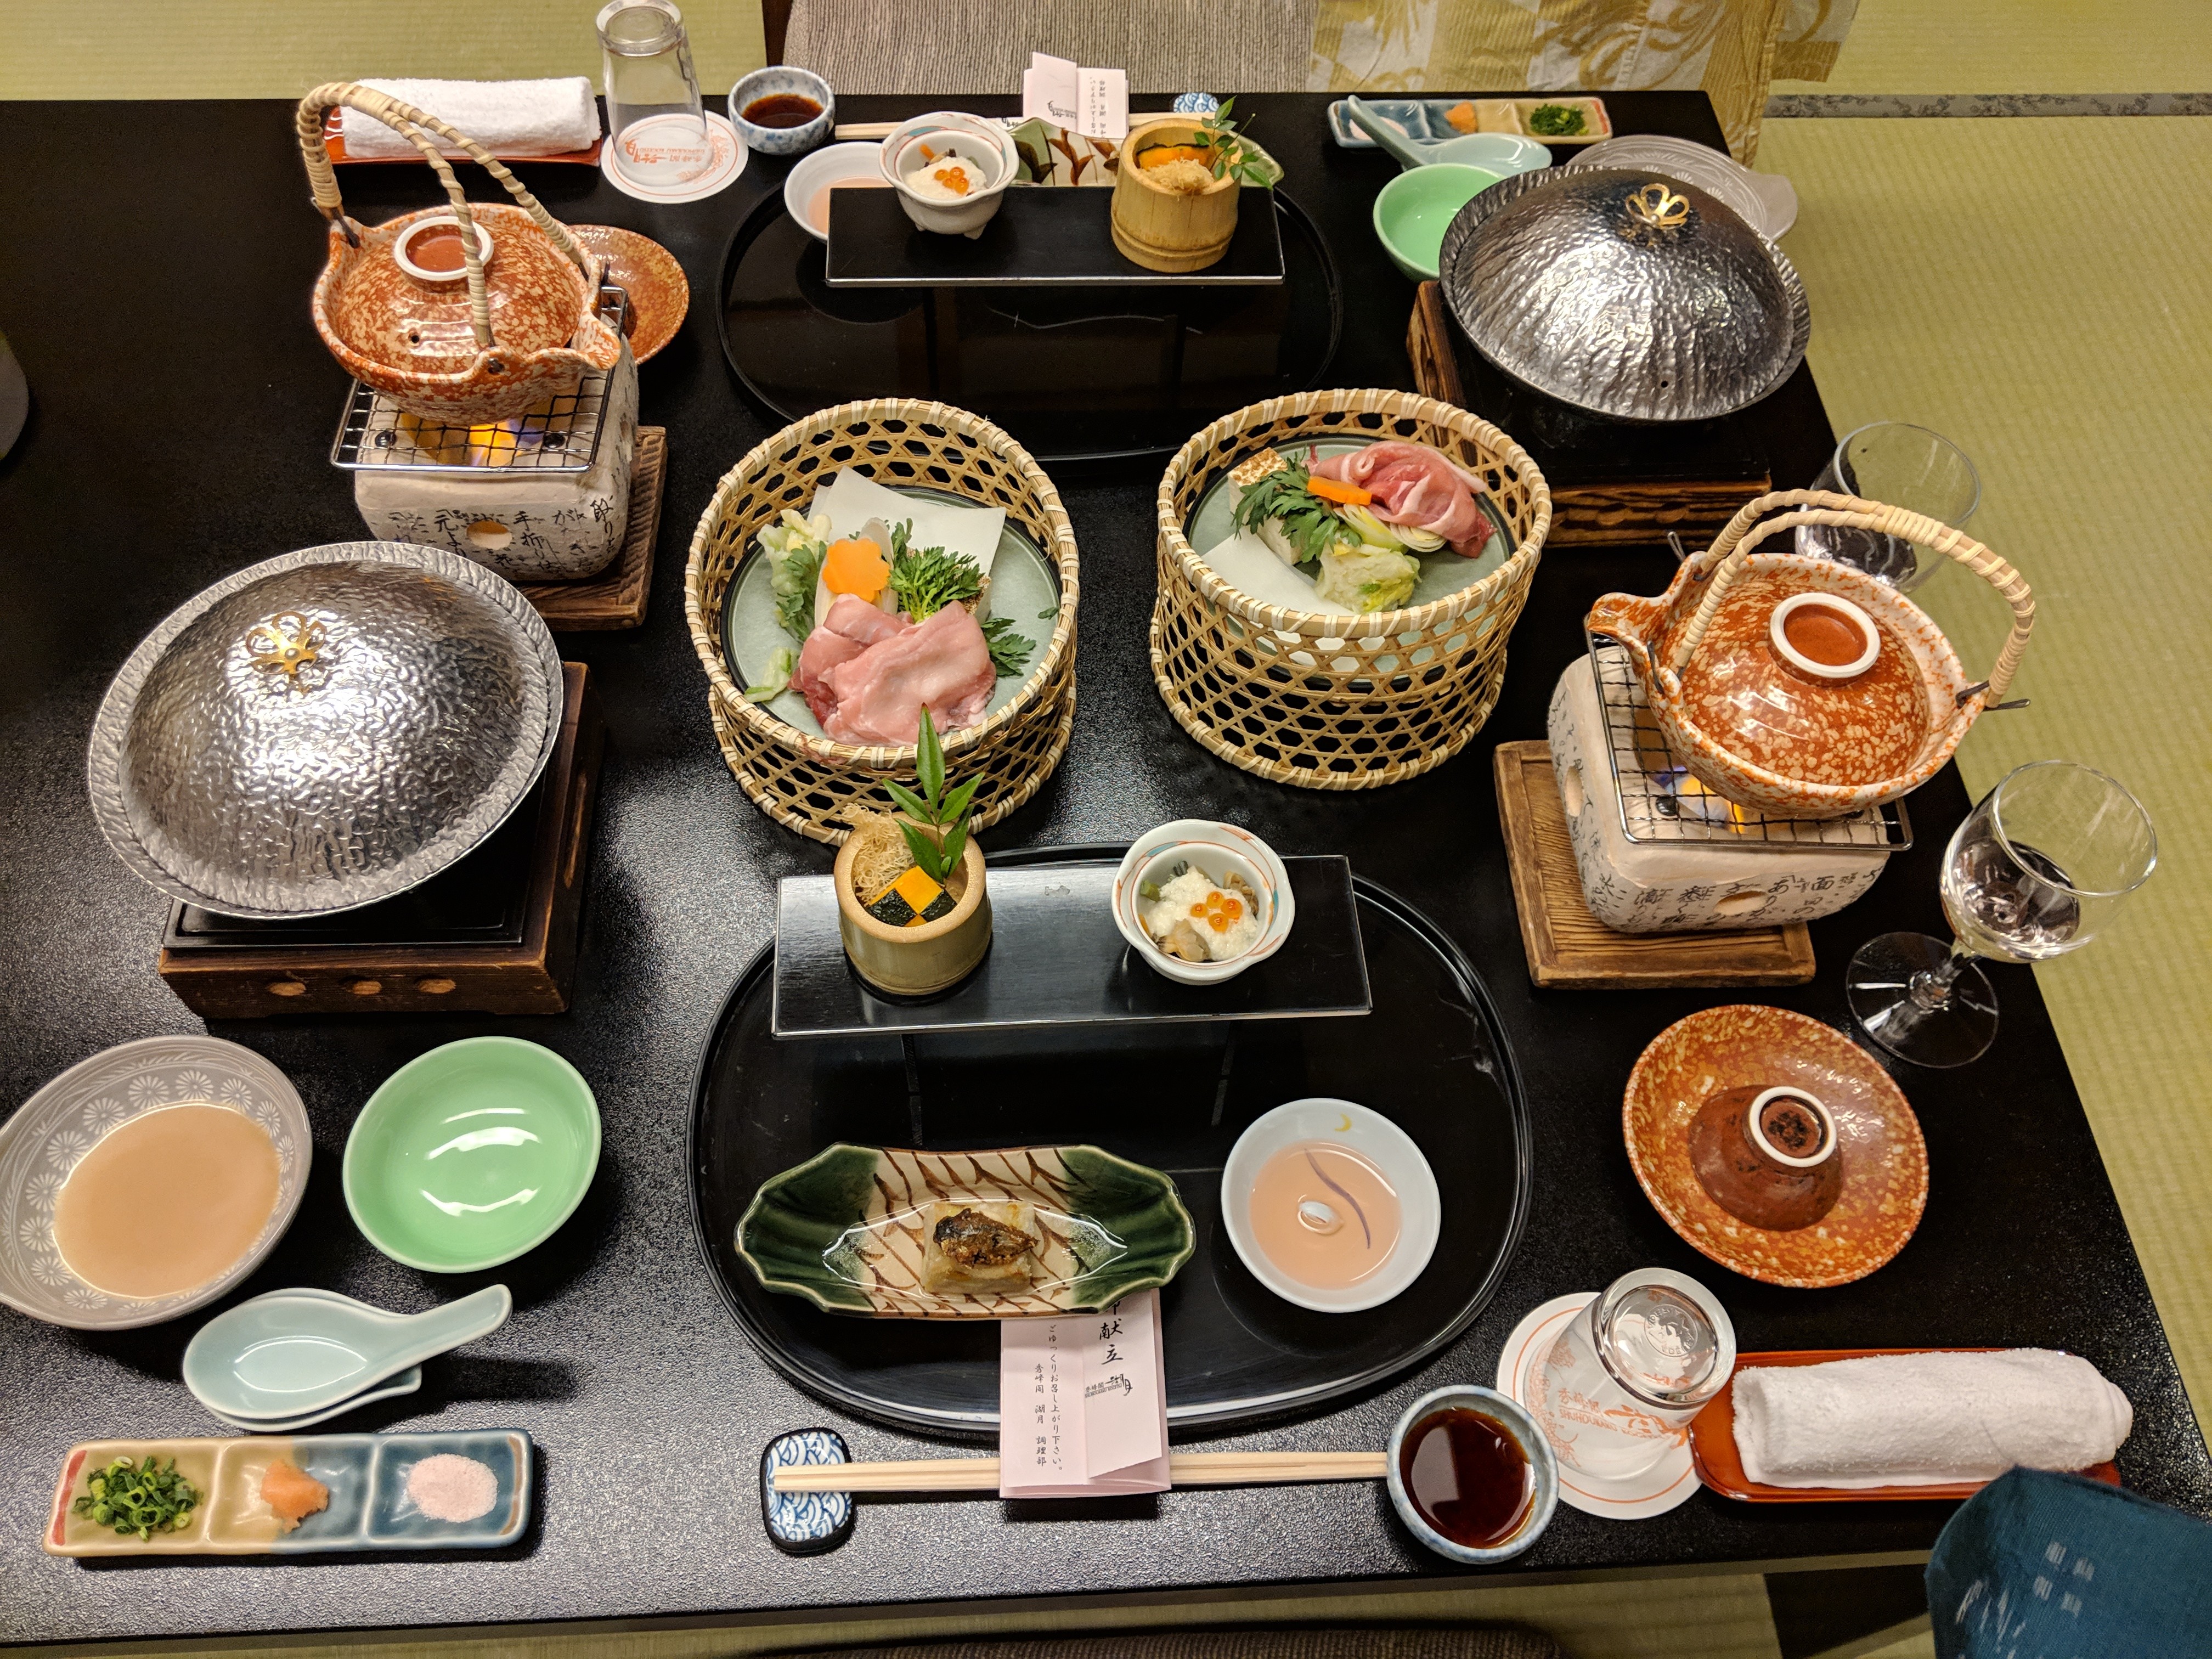 Our dinner at the ryokan